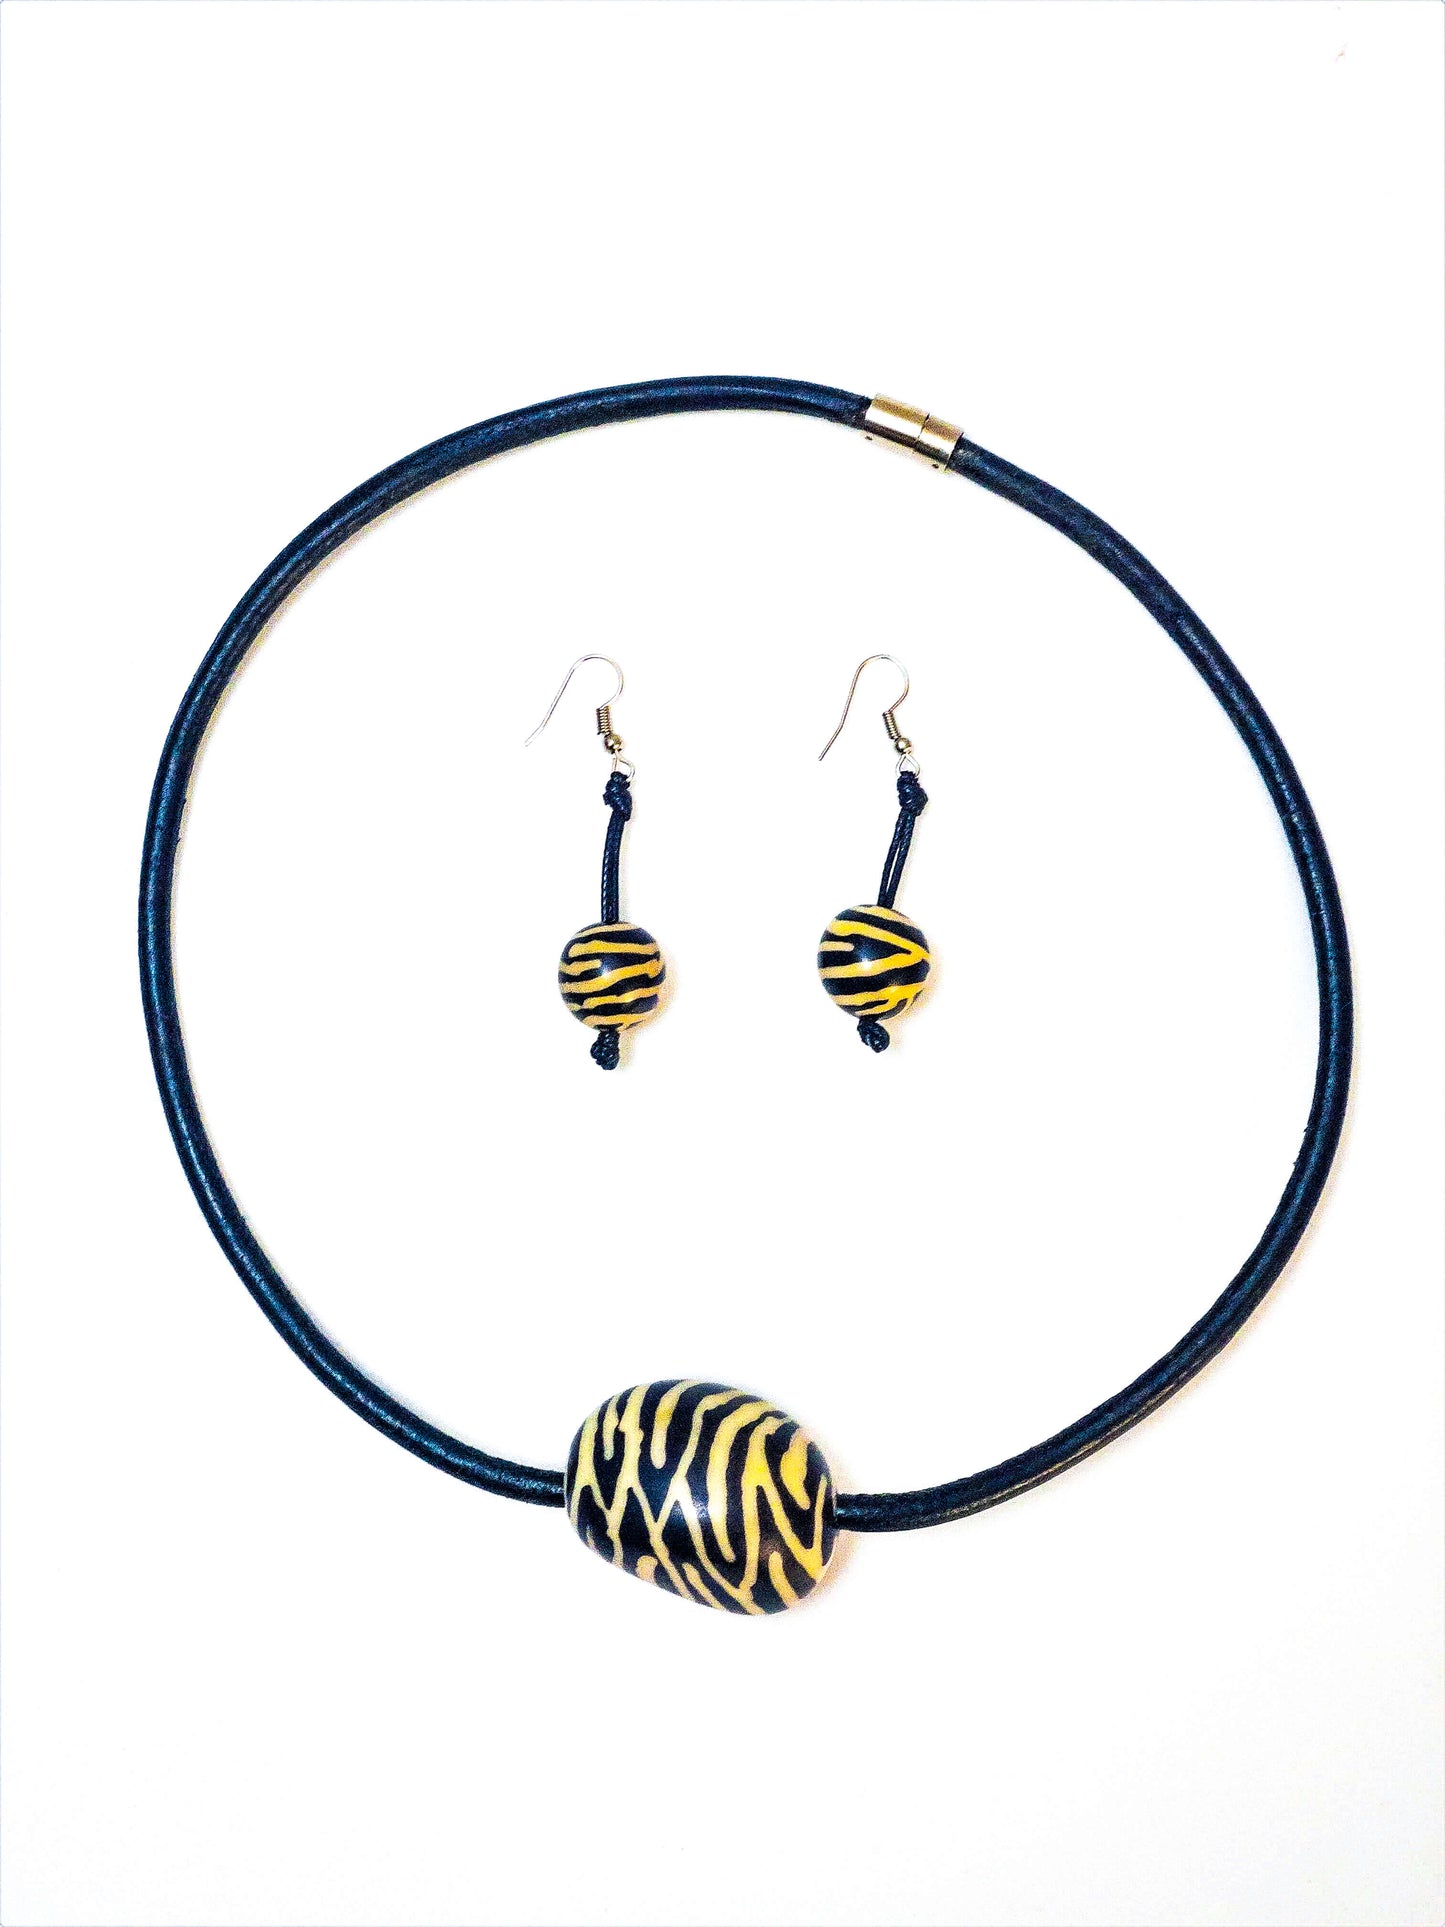 Bengal Animal Print Necklace and Earrings Set